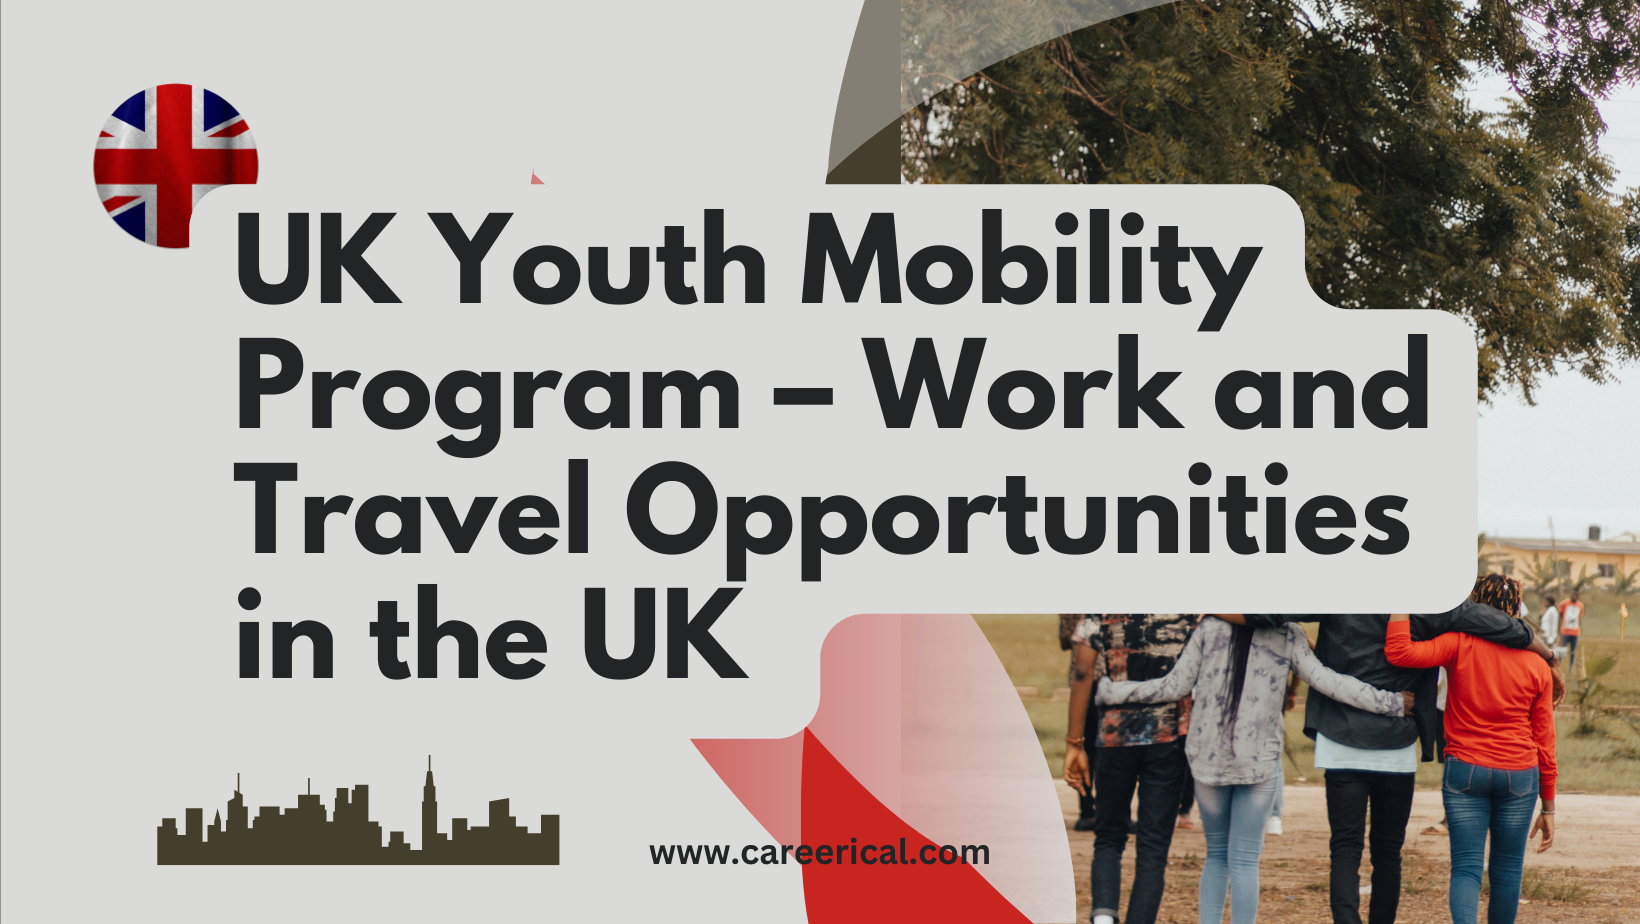 UK Youth Mobility Program – Work and Travel Opportunities in the UK